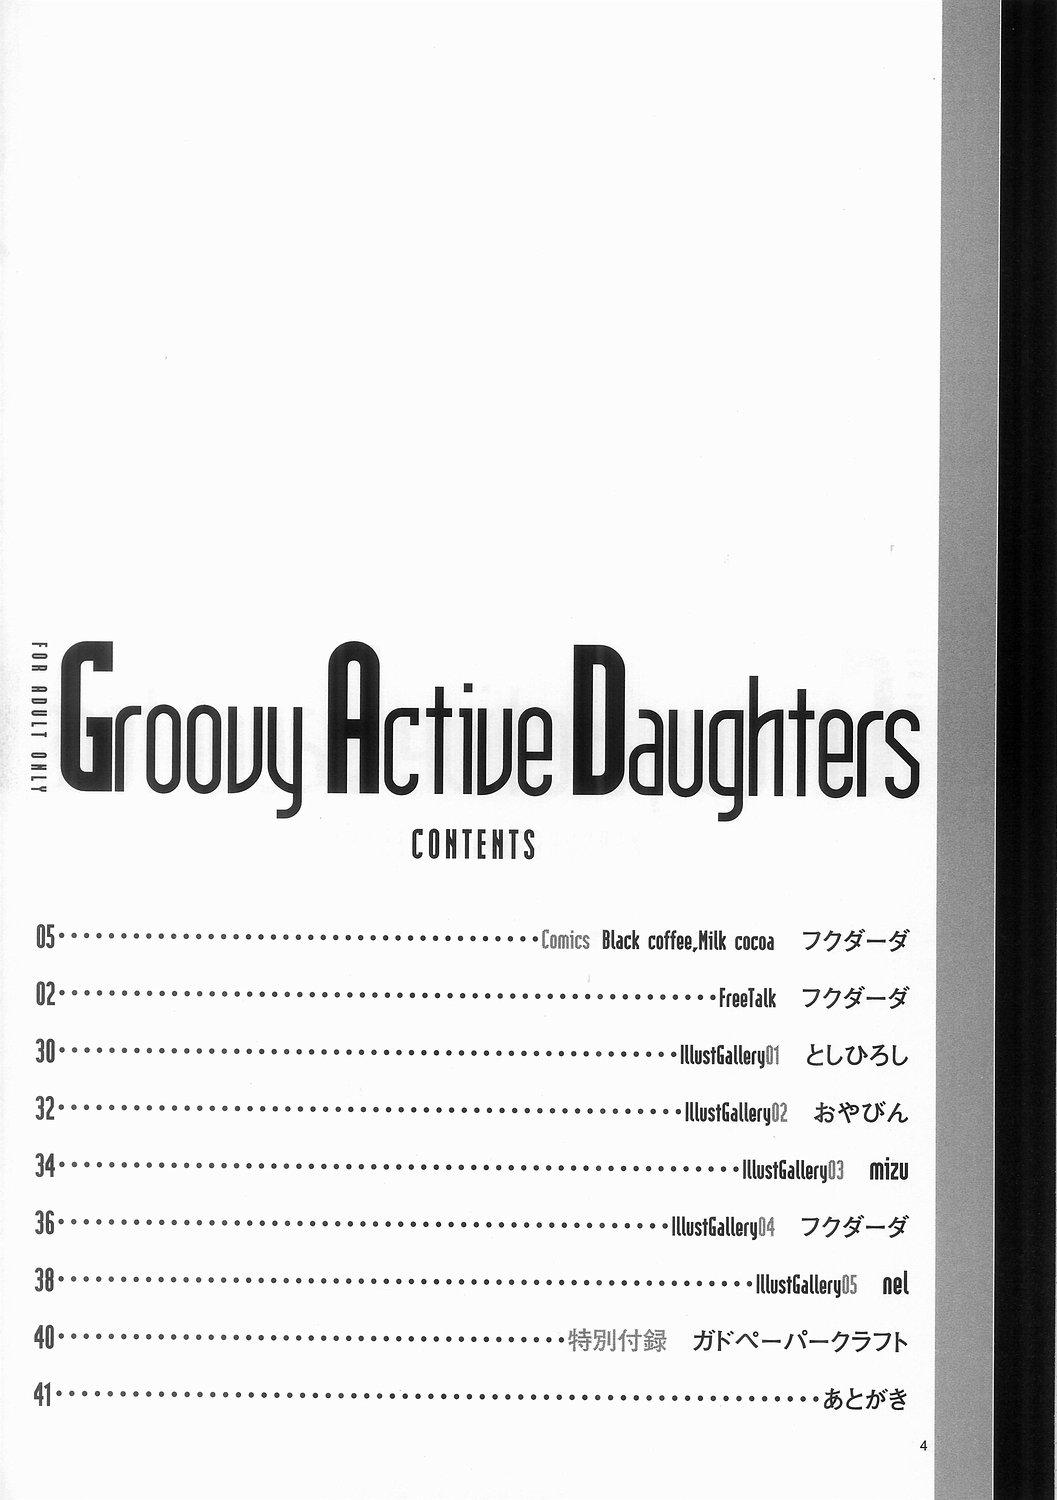 Dick Groovy Active Daughters - Gad guard Club - Page 4